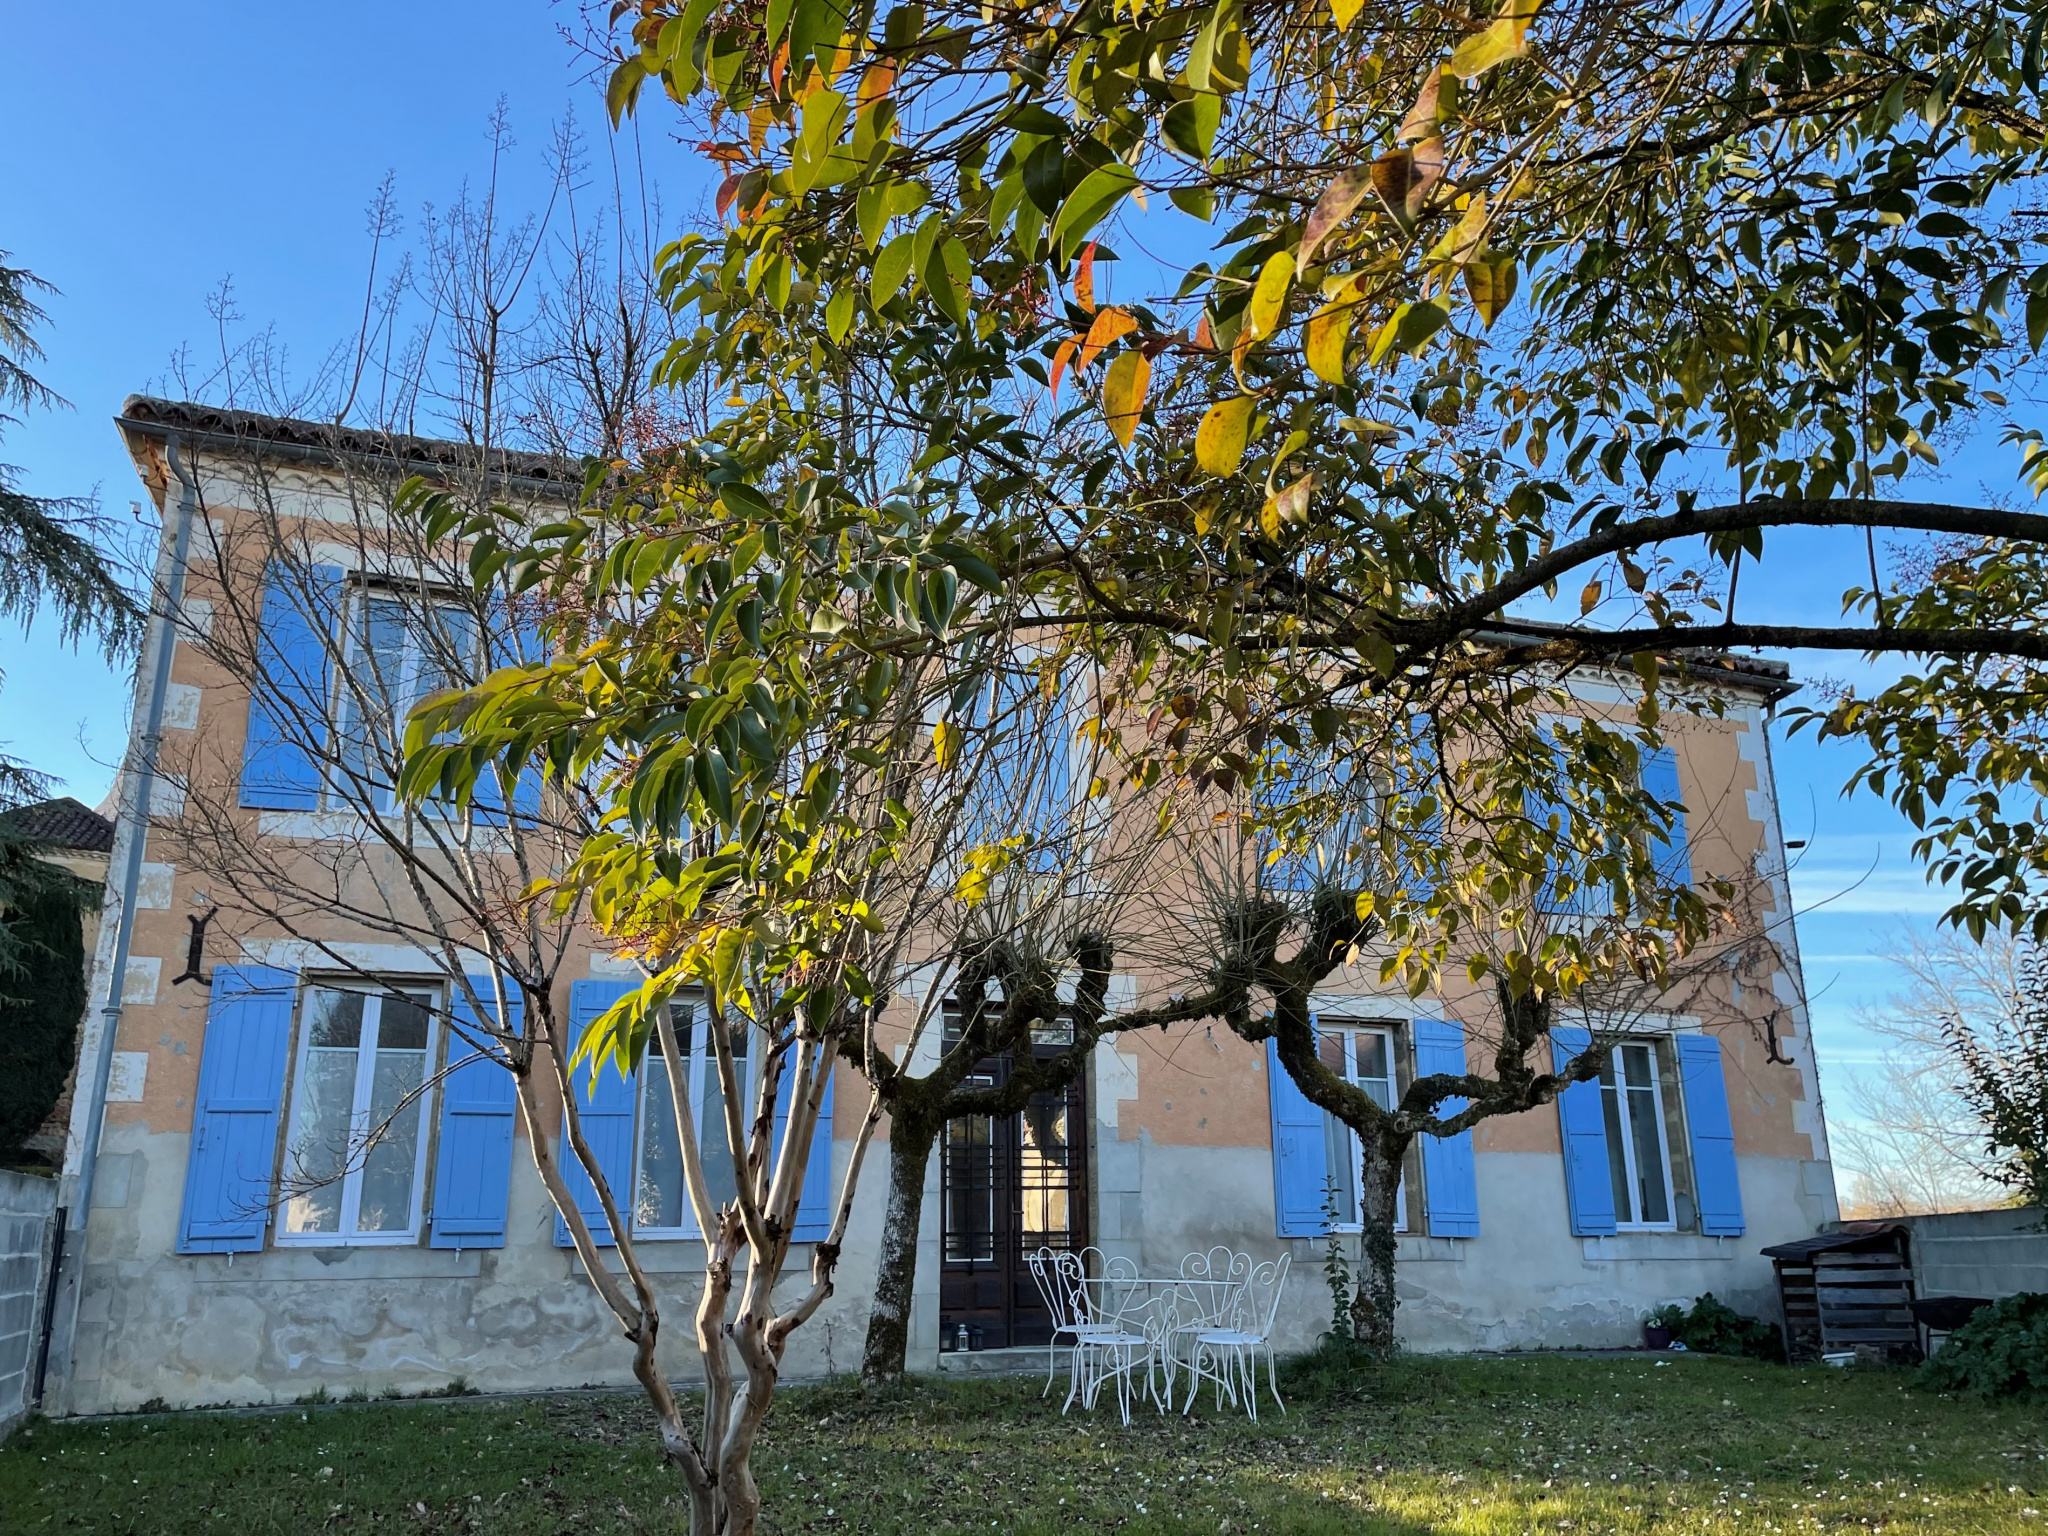 CLOSE TO EAUZE and NOGARO, COMPLETELY RENOVATED STONE HOUSE WITH 3 BEDROOMS AND ENCLOSED GARDEN